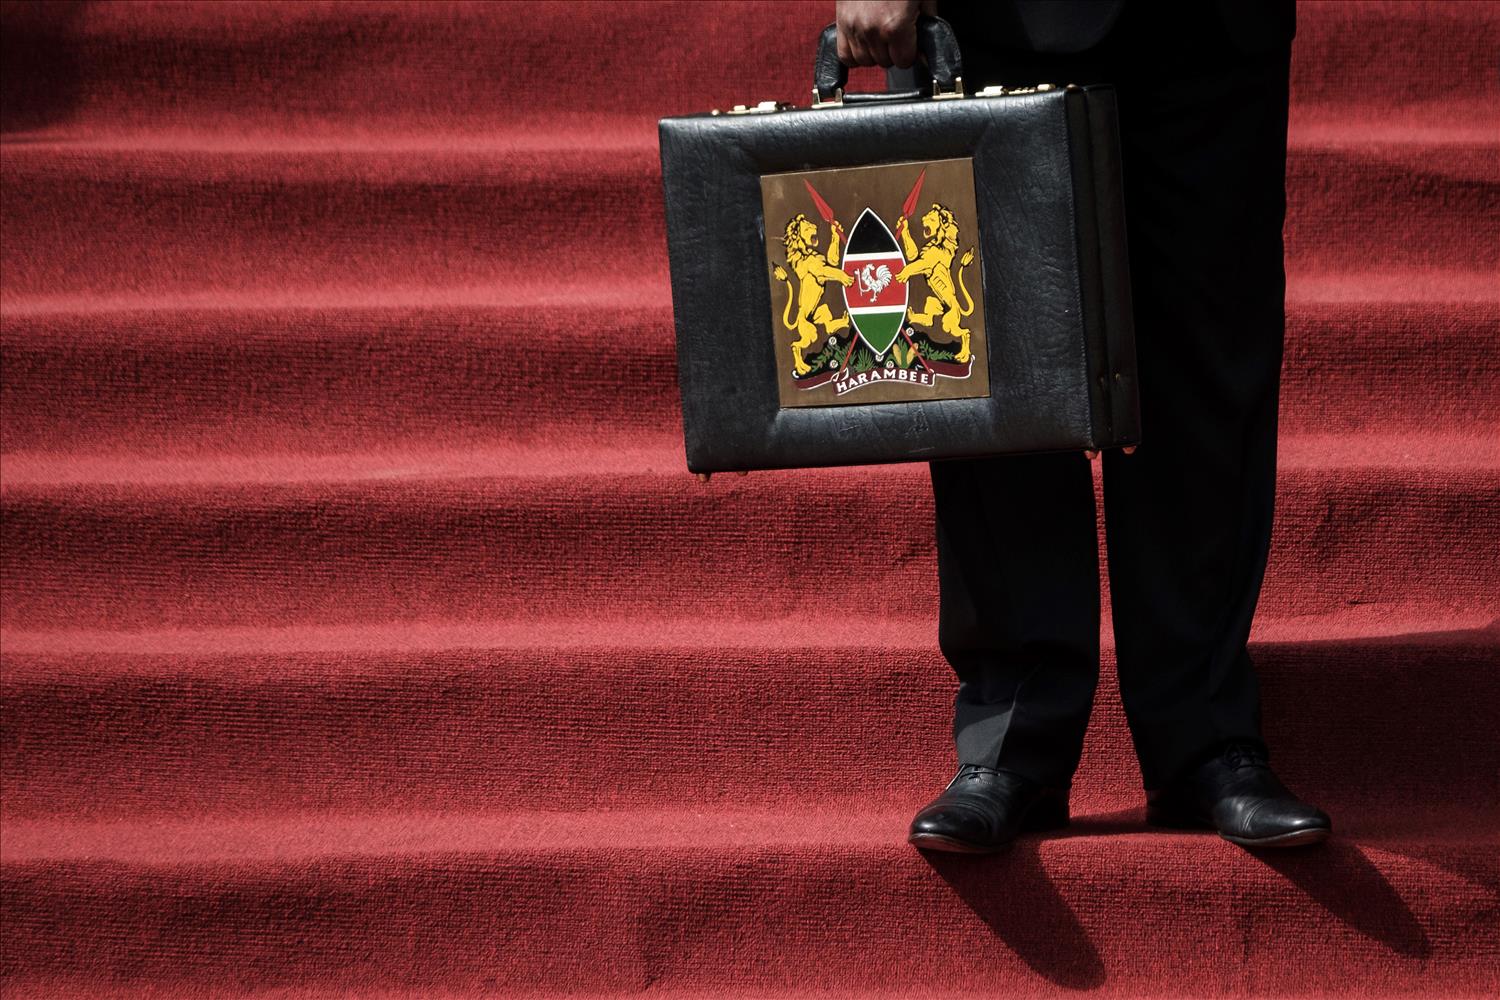 Kenya's New Finance Minister Has Good Credentials But He Can't Work Miracles